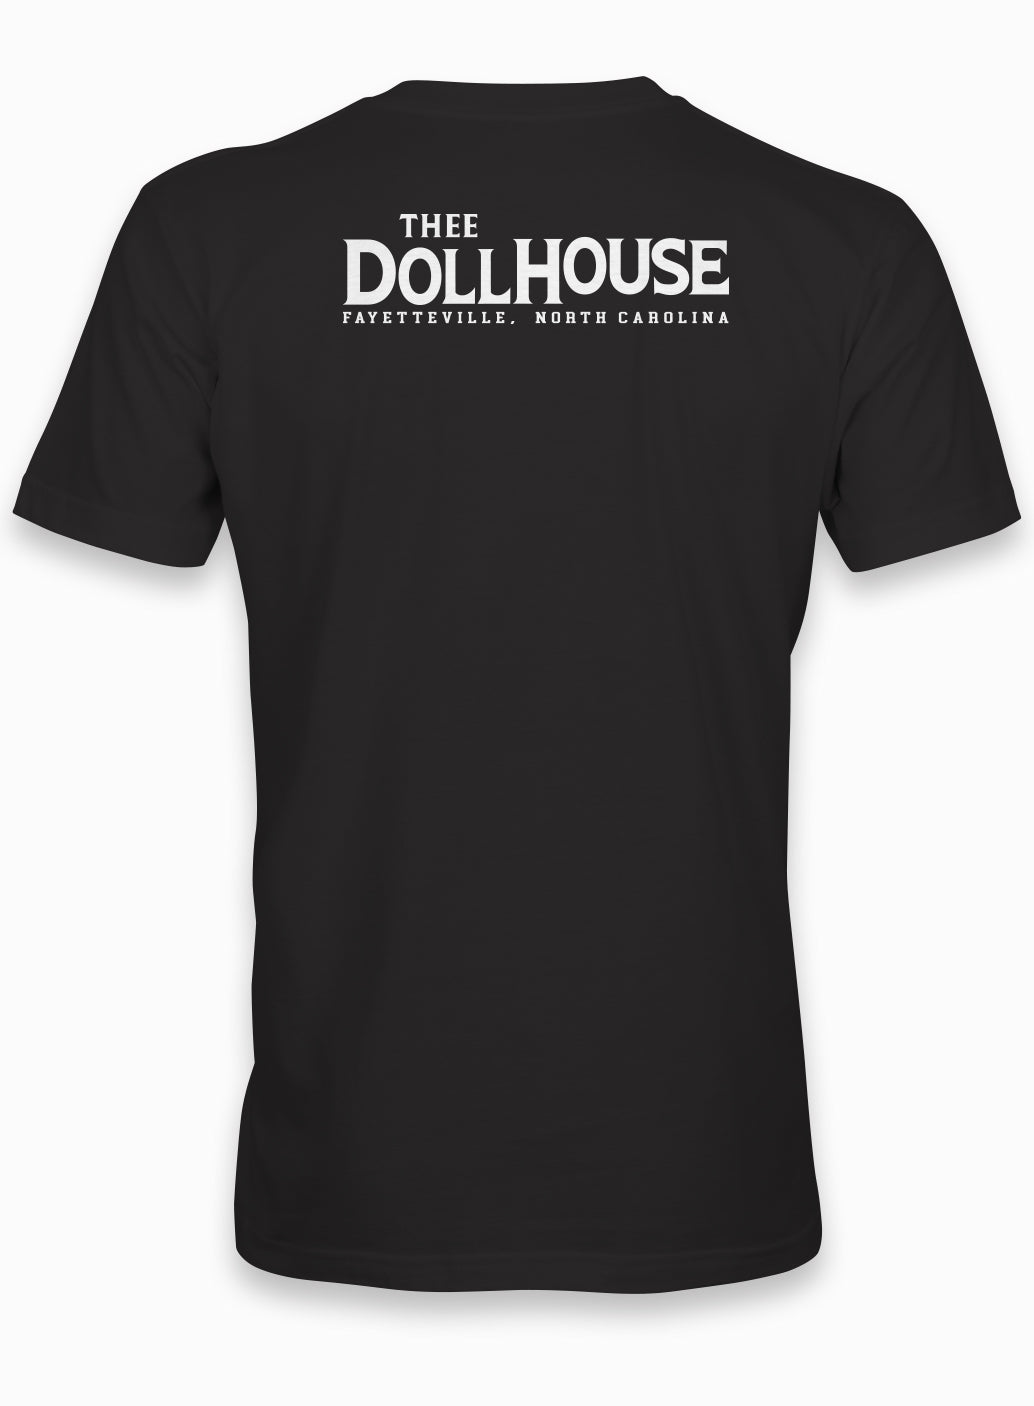 Thee Dollhouse T-shirt